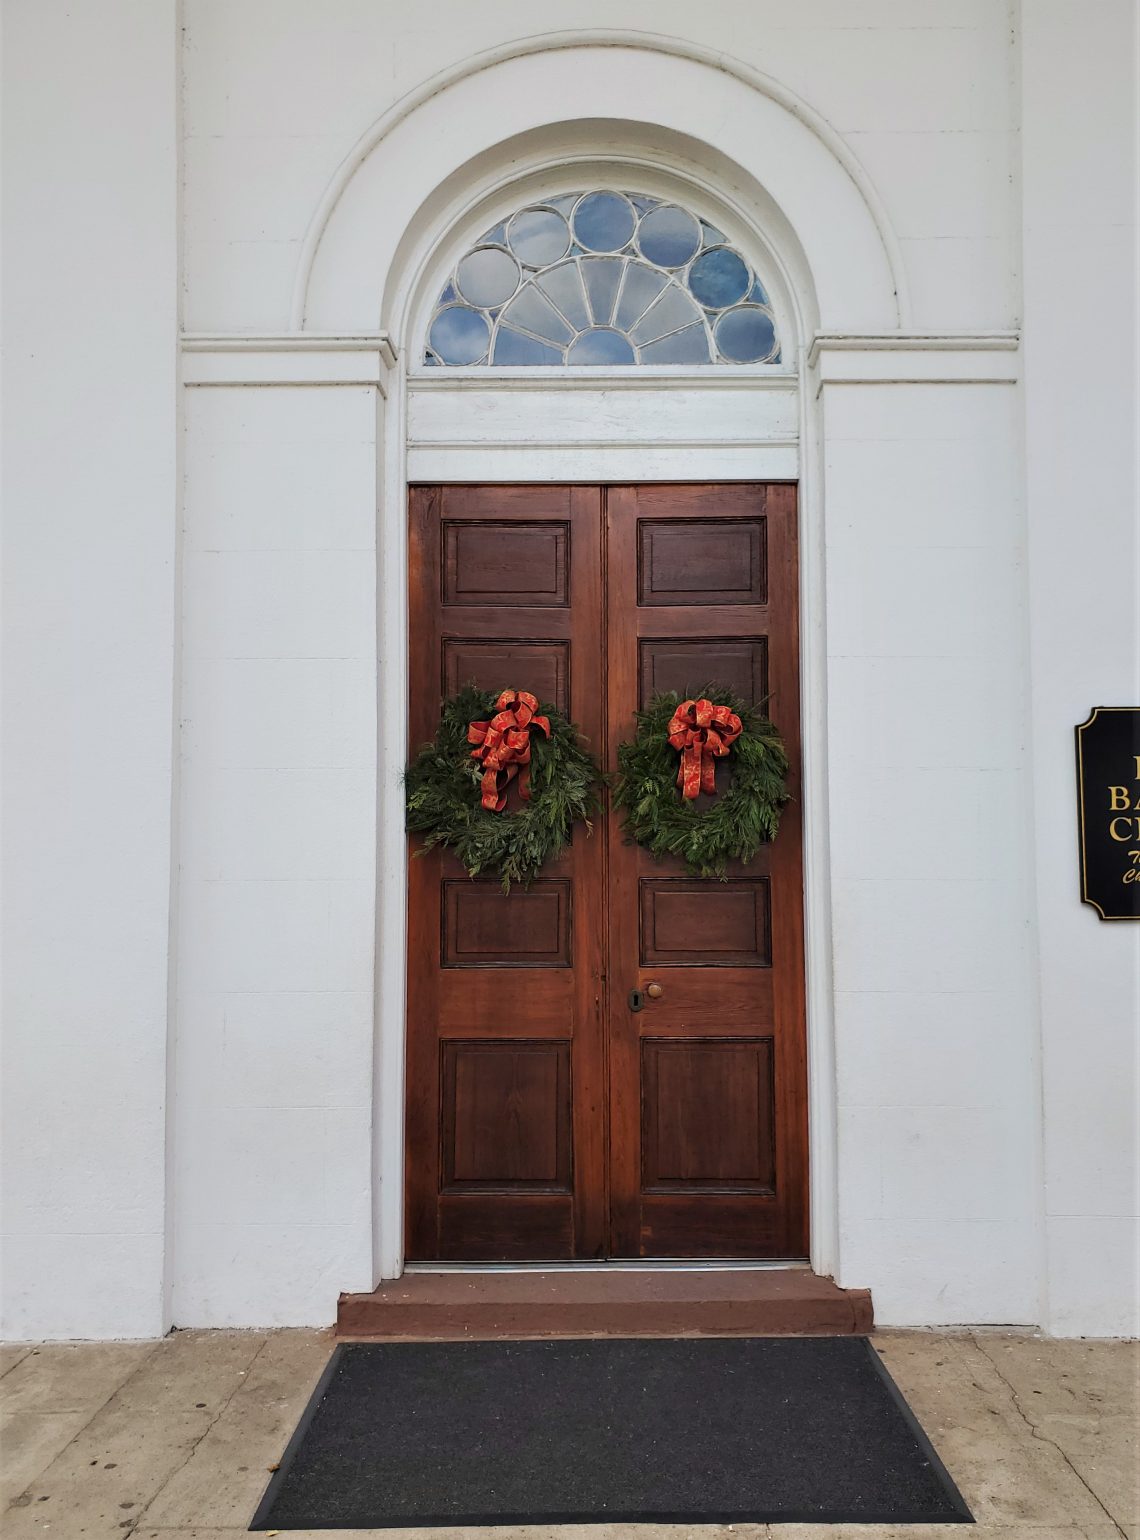 These wreaths adorn the entry to the First Baptist Church on Church Street. The oldest baptist church in the south, First Baptist can trace its congregation's roots back to 1682... to Kittery, Maine! In 1696, the pastor and 28 congregants moved to Charleston.